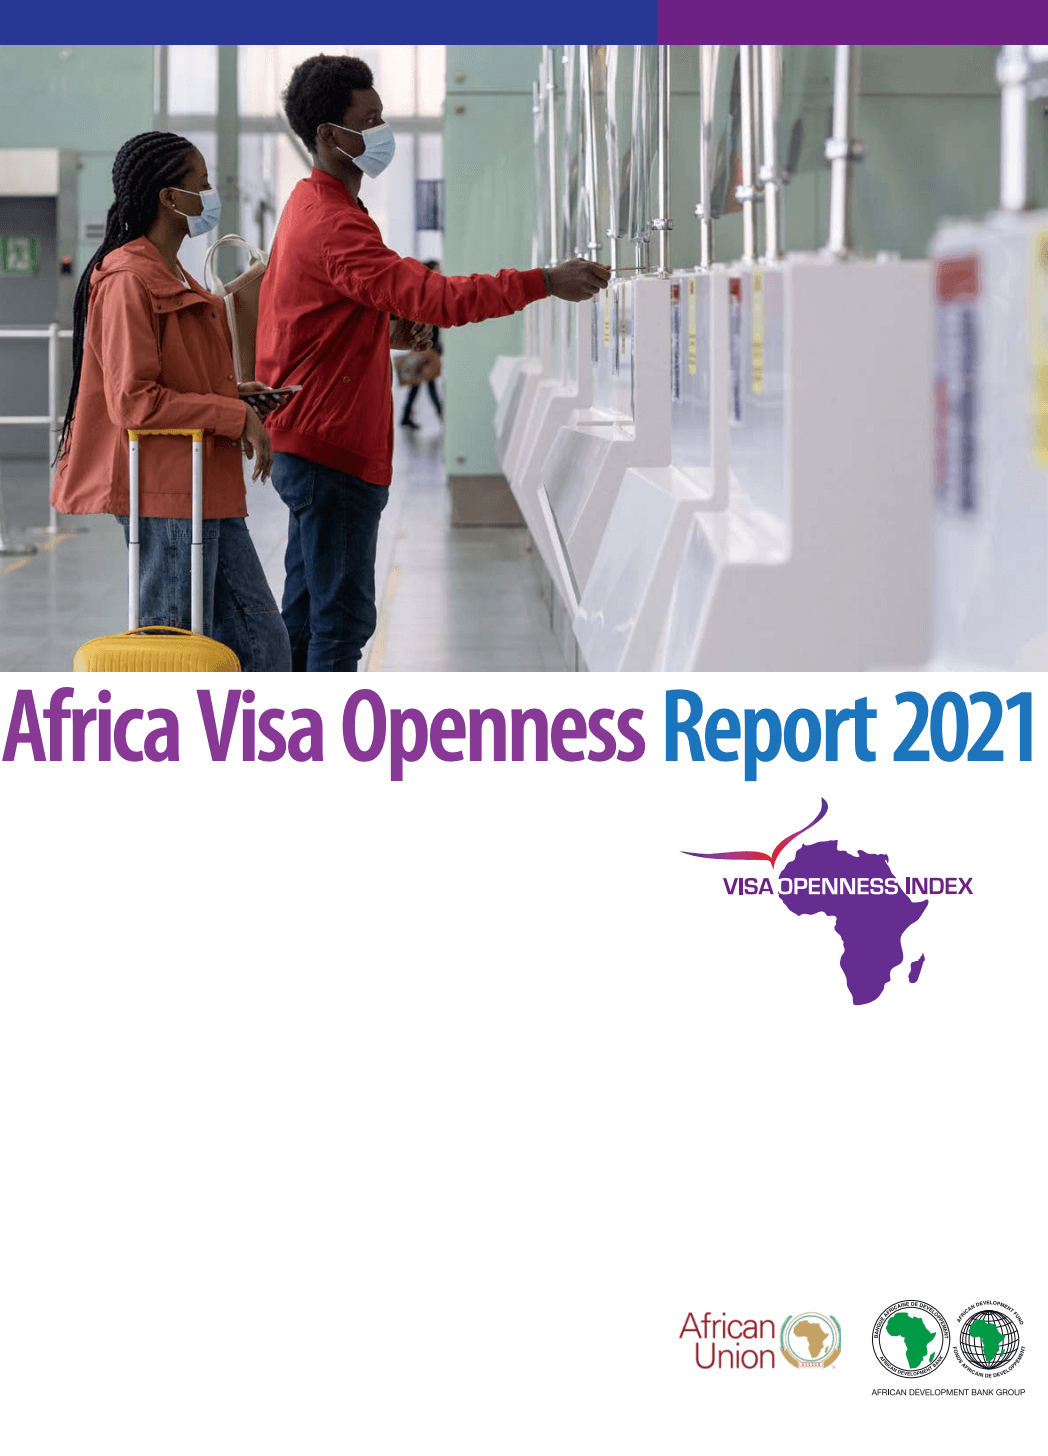 Africa Visa Openness 2021 Report